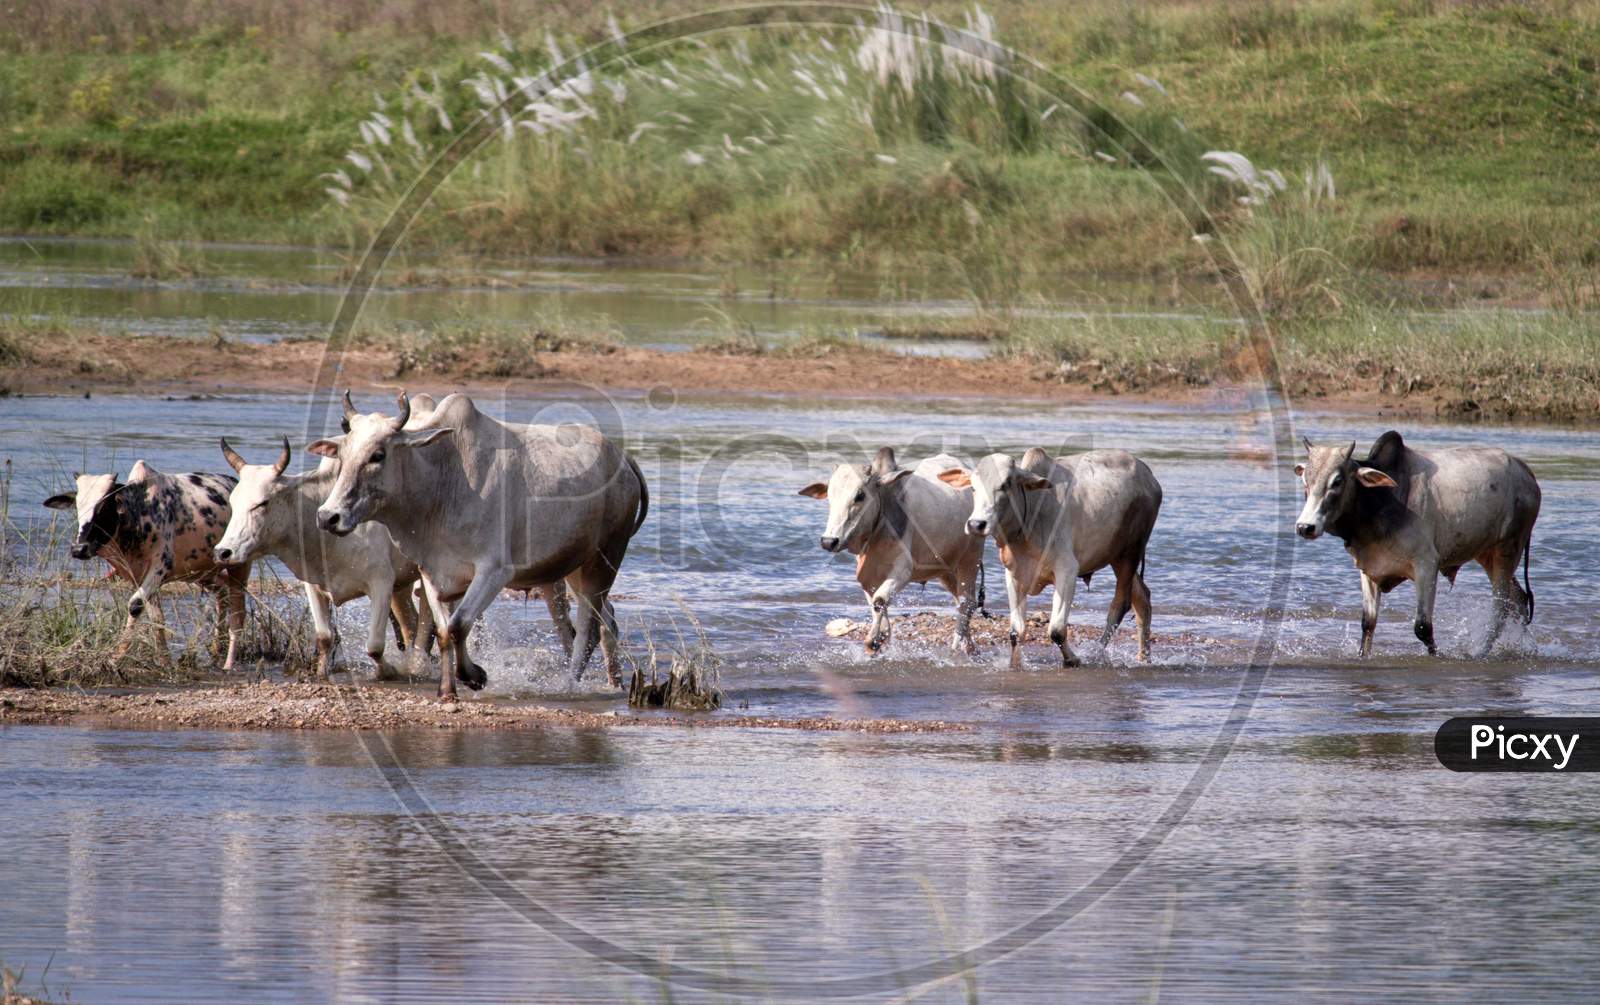 Cows And Bulls Crossing River, Indian Countryside Beauty, Perfect For Wallpaper